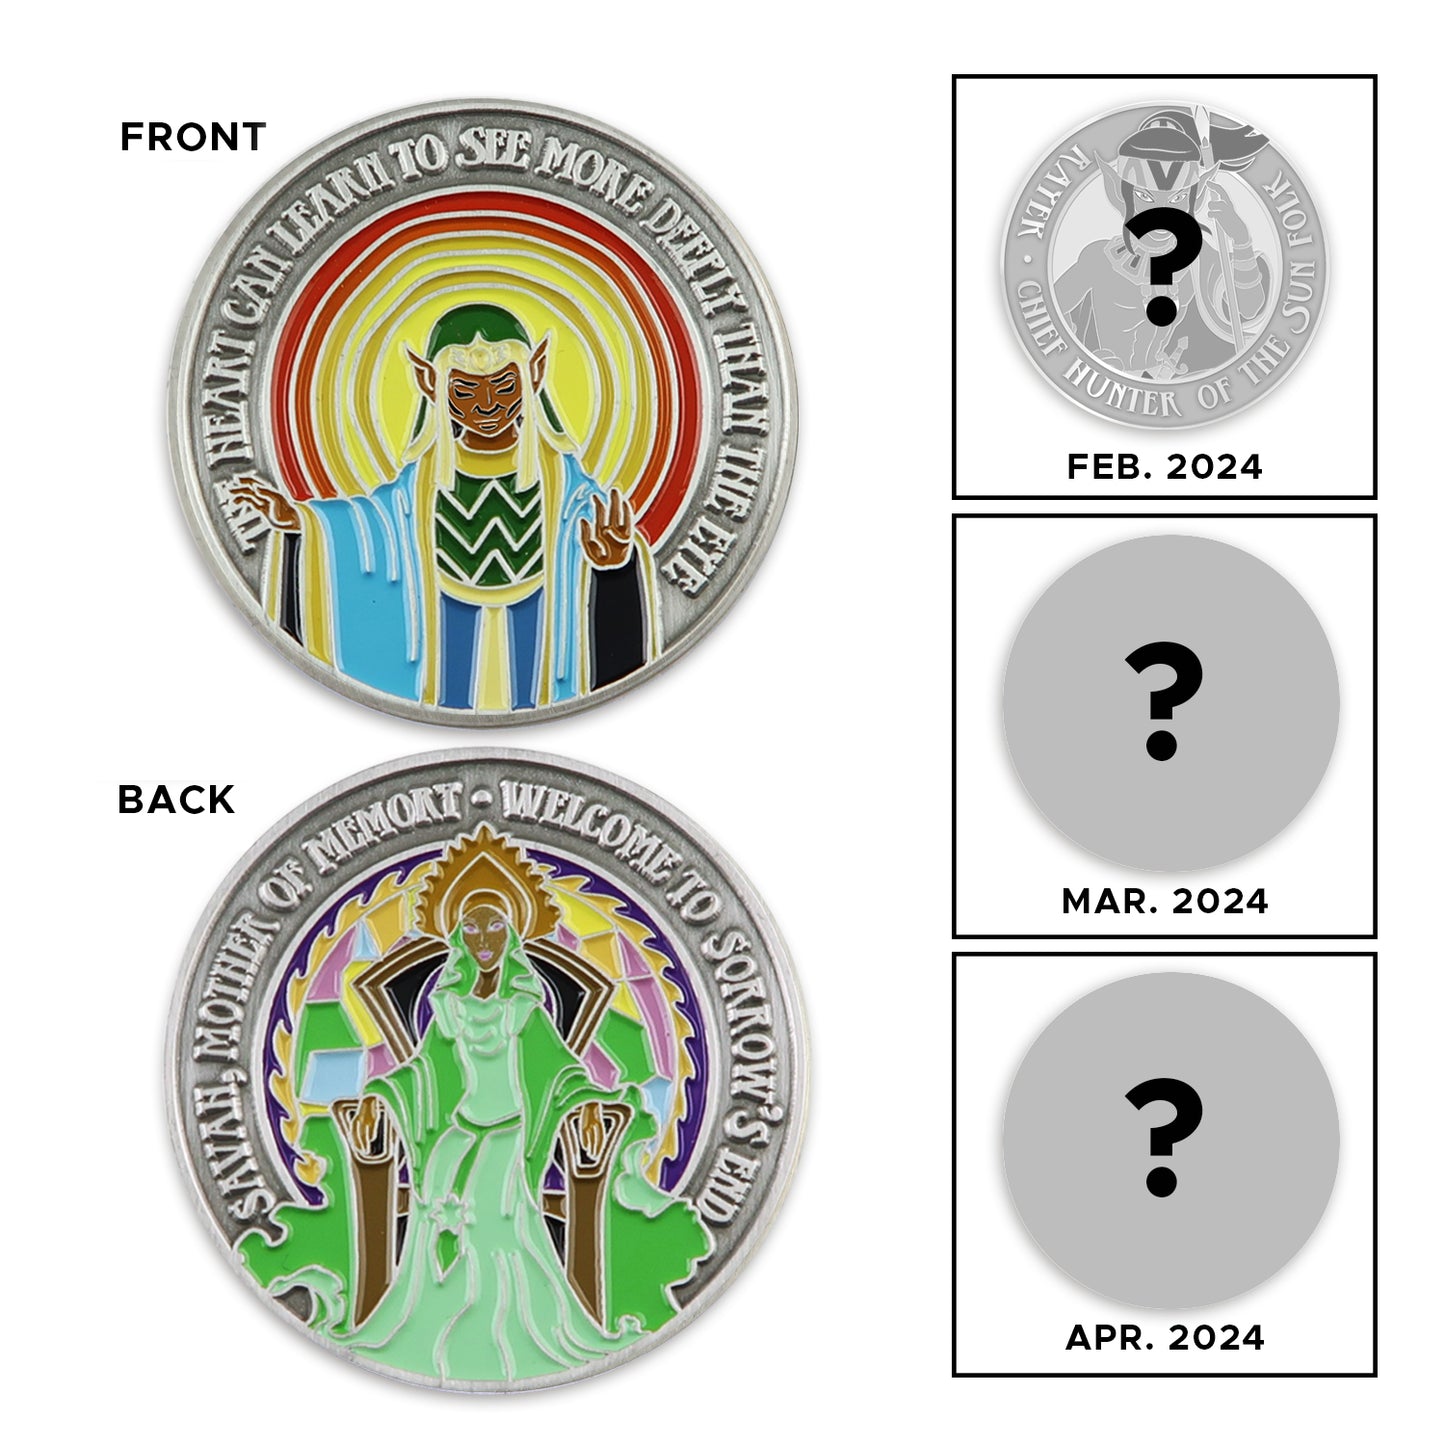 Load image into Gallery viewer, Front and back images of a brass challenge coin, on a wood table. The front depicts an elf in blue robes, with red and yellow waves radiating outward. Raised text around the edge reads &amp;quot;the heart can learn to see more deeply than the eye.&amp;quot; The back of the coin shows an elf queen in green robes. Raised text around the egde reads &amp;quot;Savah, mother of memort, welcome to sorrow&amp;#39;s end.&amp;quot; On the right are gray coins, teasing upcoming challenge coins
